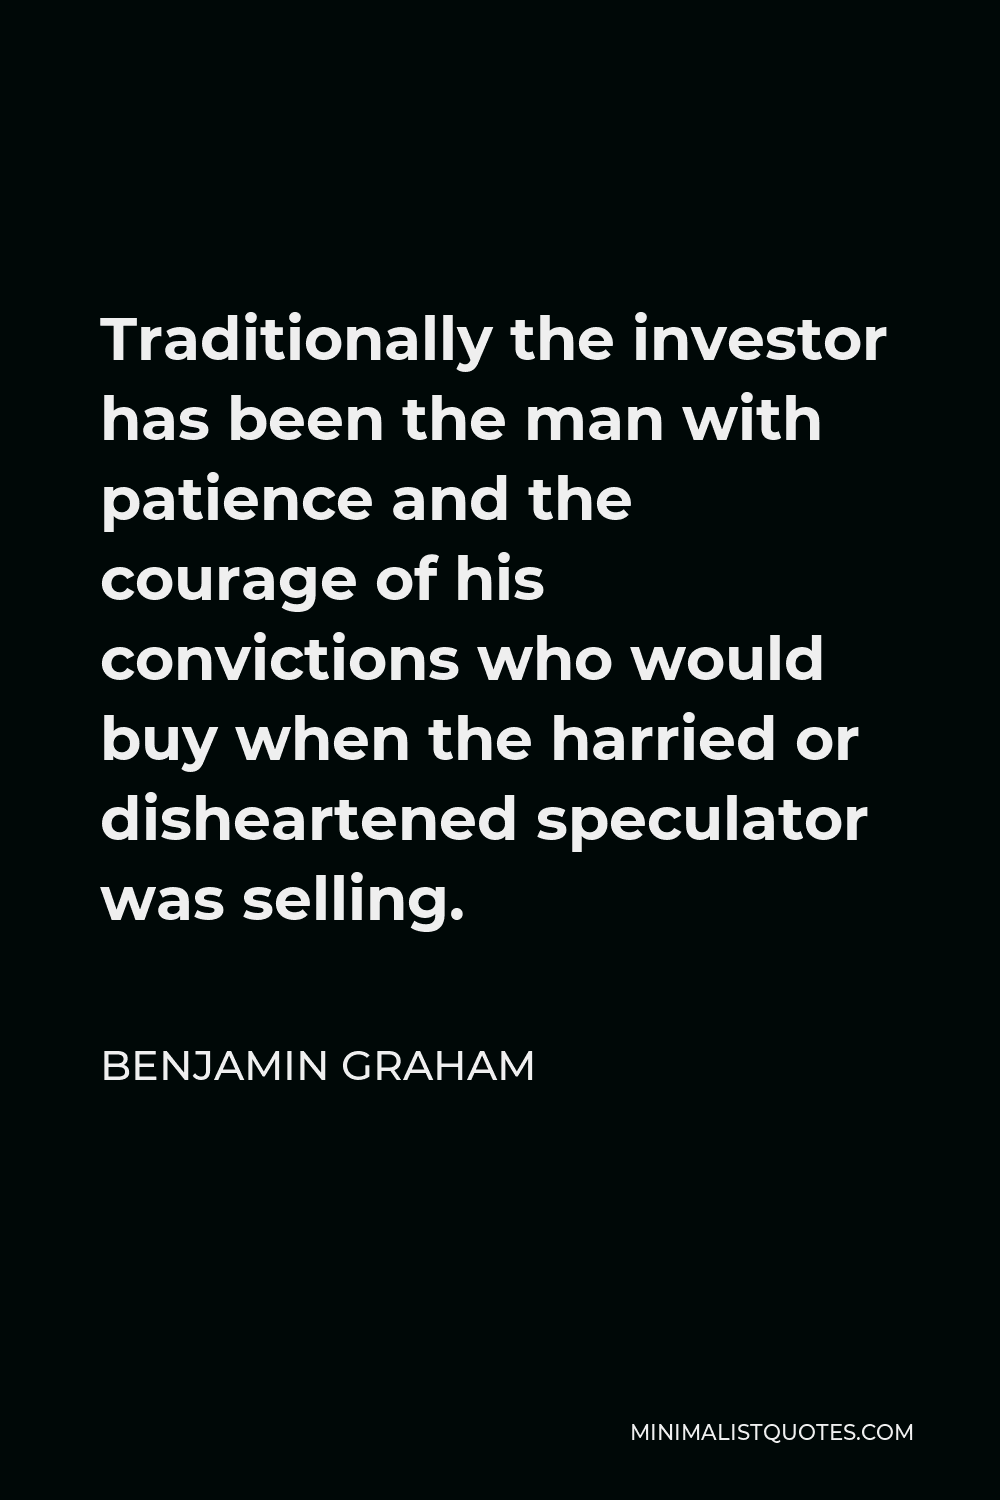 Benjamin Graham Quote - Traditionally the investor has been the man with patience and the courage of his convictions who would buy when the harried or disheartened speculator was selling.